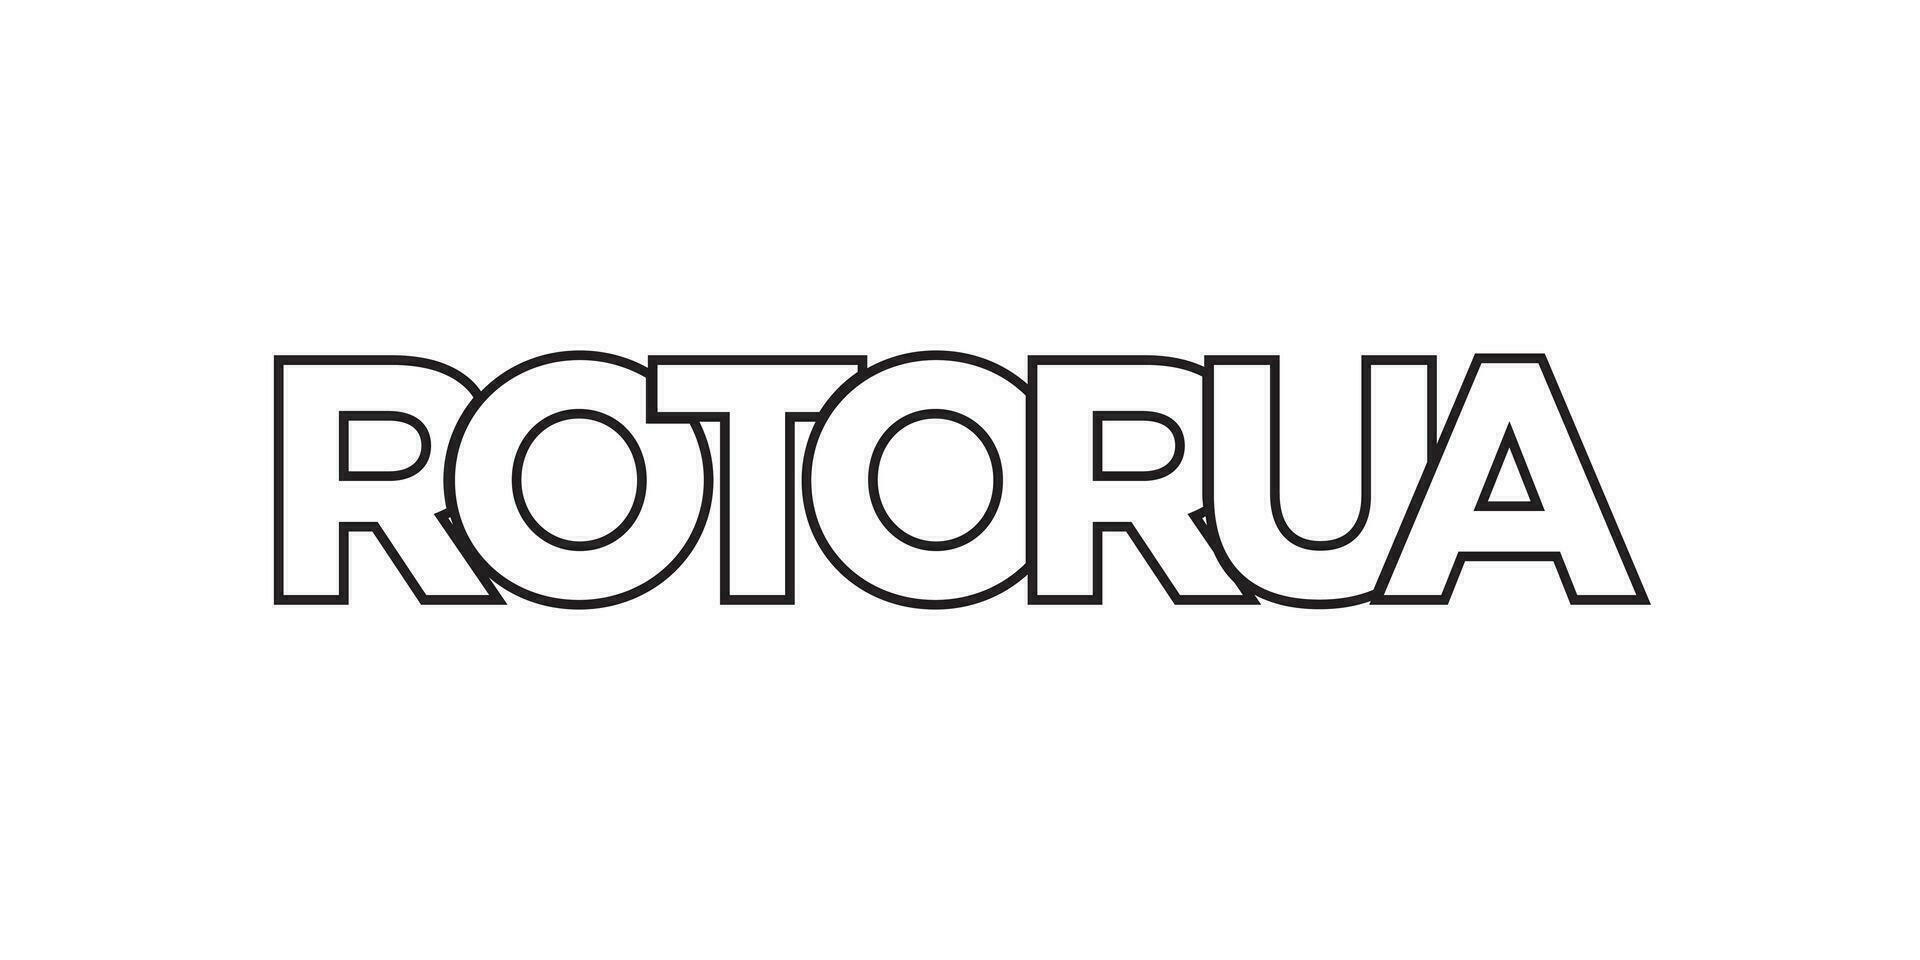 Rotorua in the New Zealand emblem. The design features a geometric style, vector illustration with bold typography in a modern font. The graphic slogan lettering.